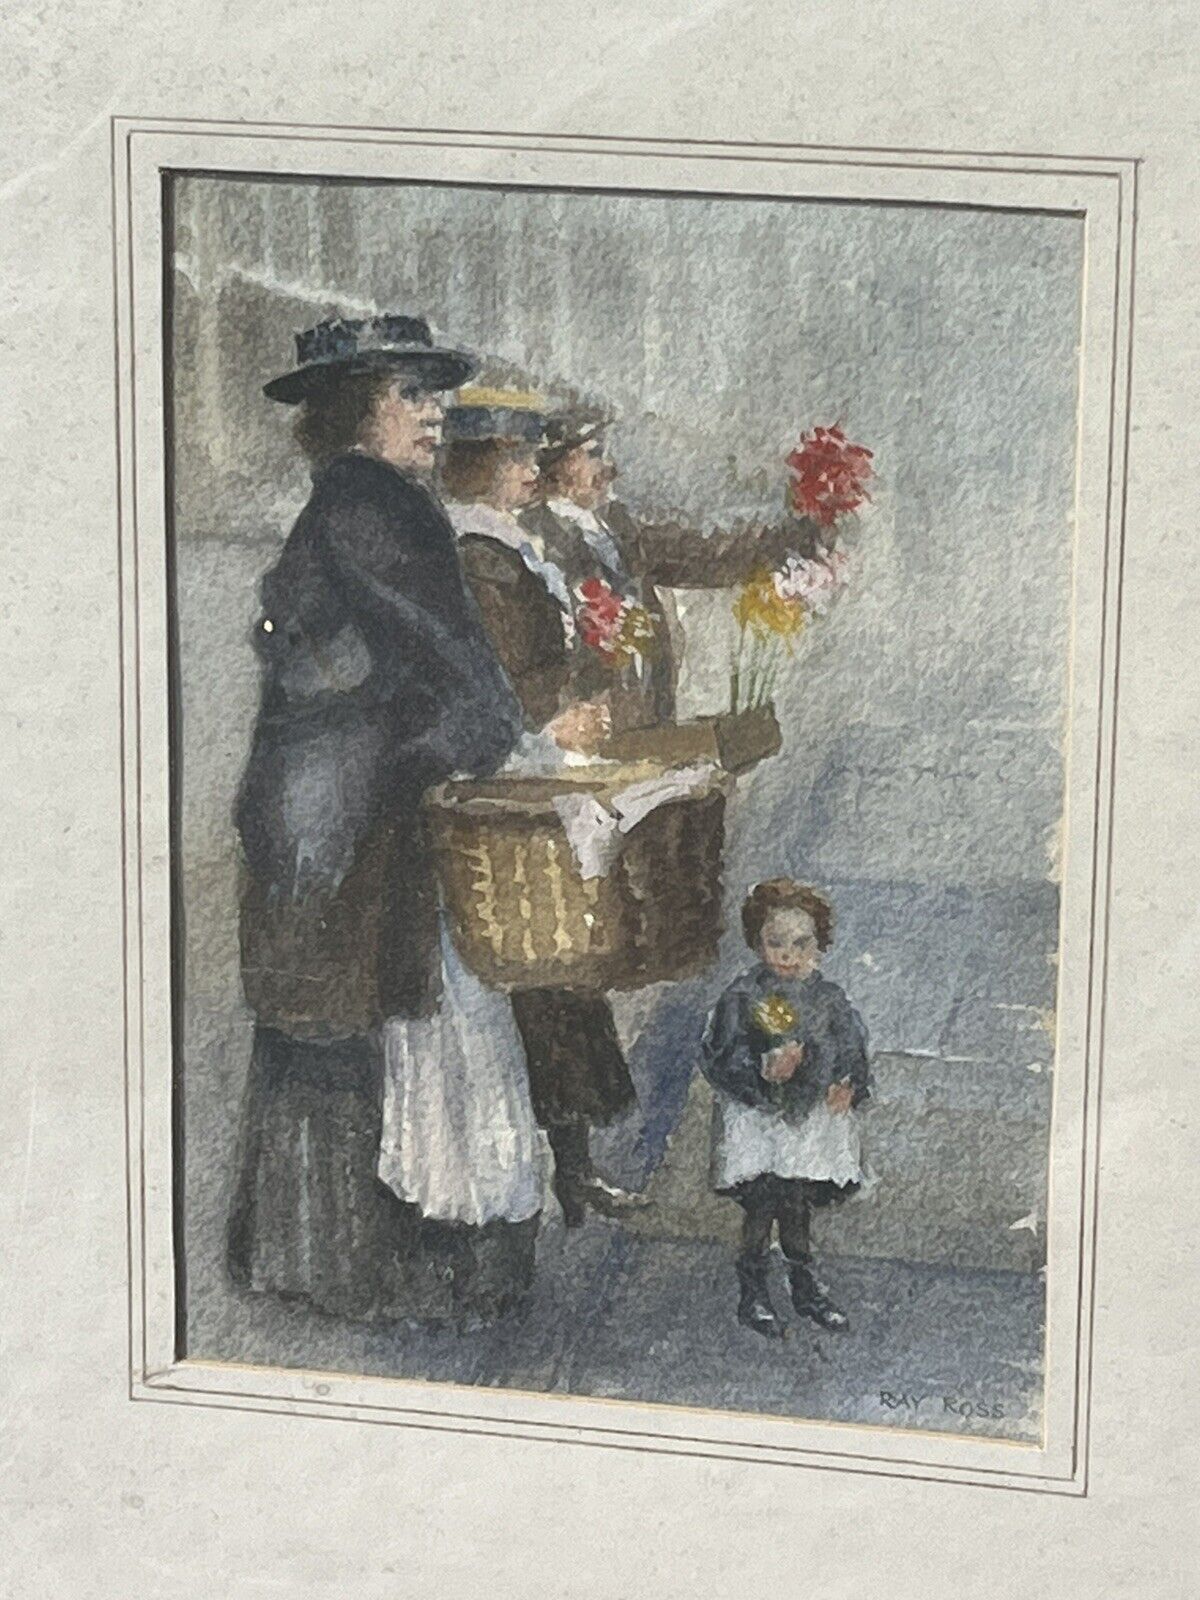 London Characters. Framed & Signed Watercolour By Ray Ross. “Flower Seller “